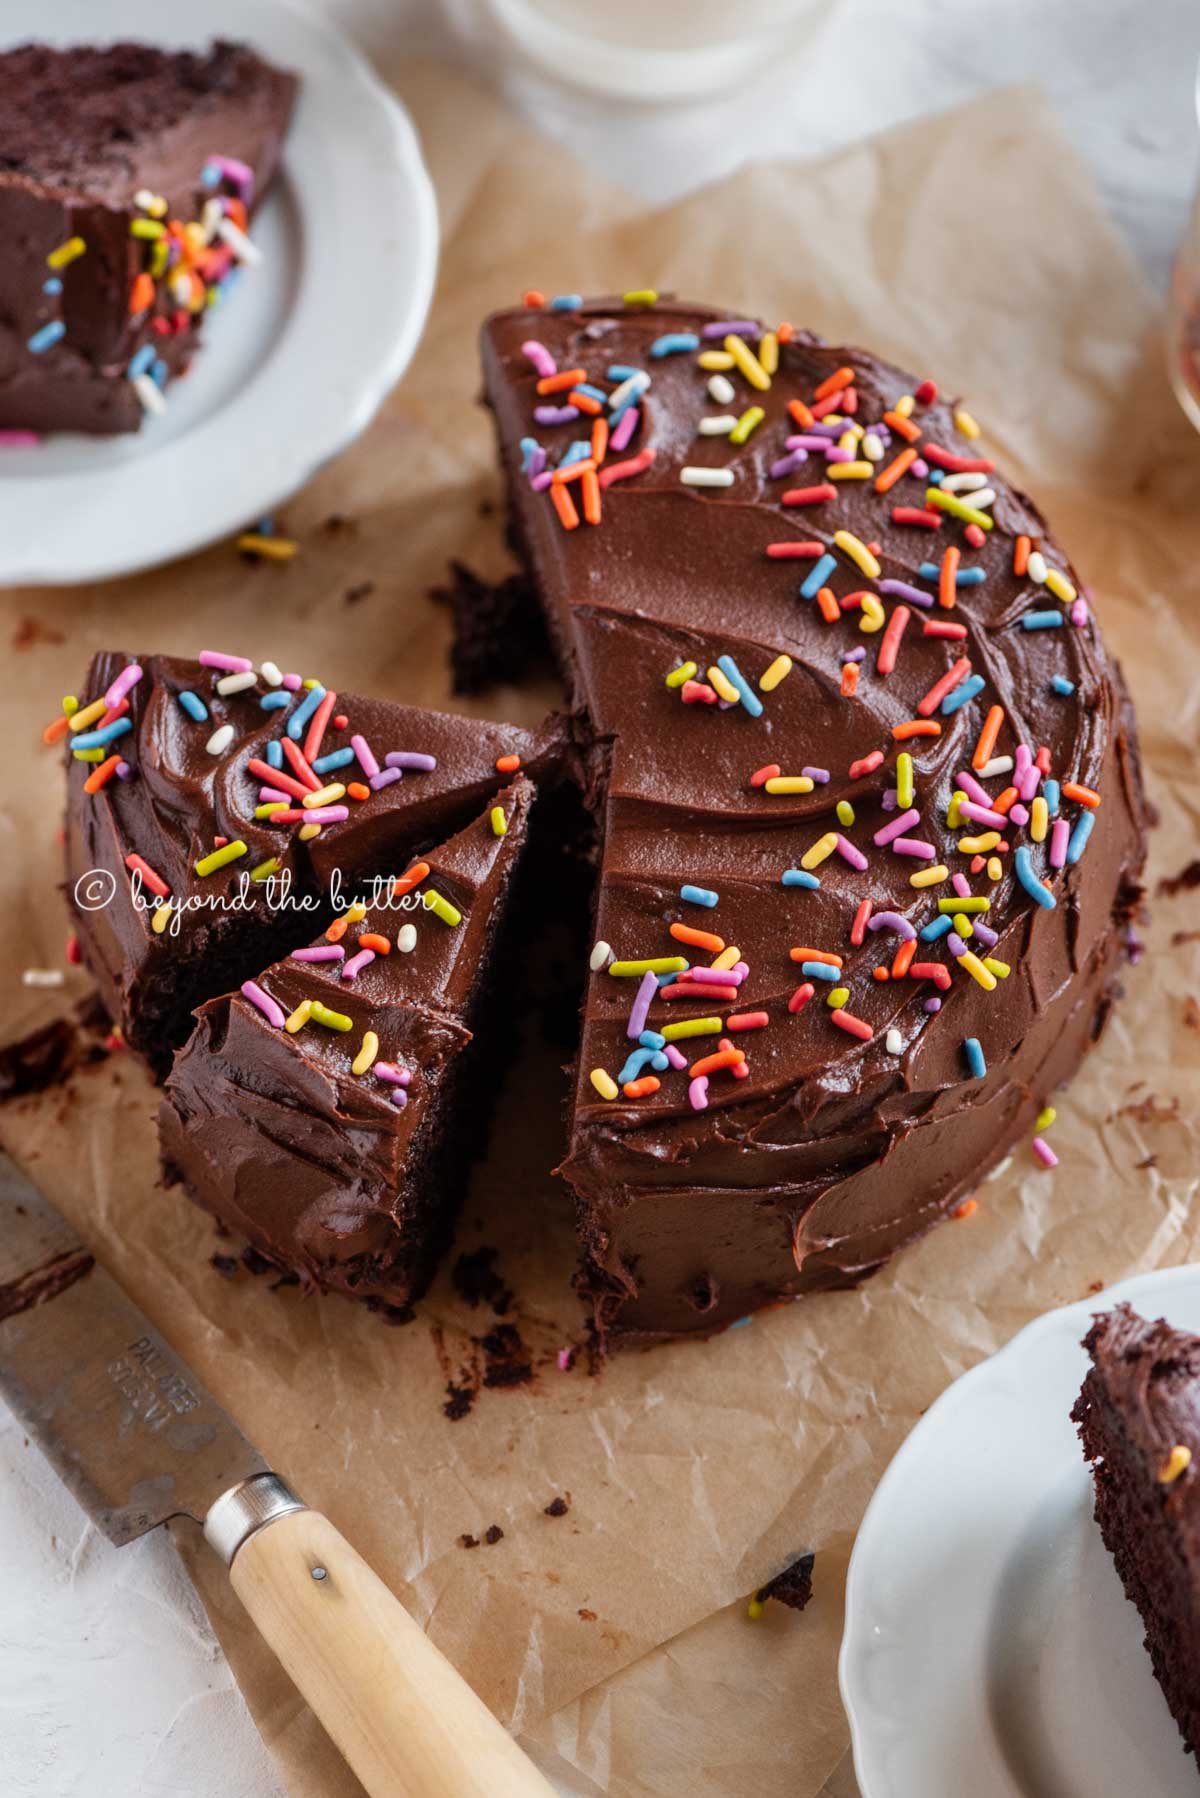 Angled image of sliced single layer chocolate cake on parchment paper with slices of cake on small dessert plates around it and a knife on parchment paper.